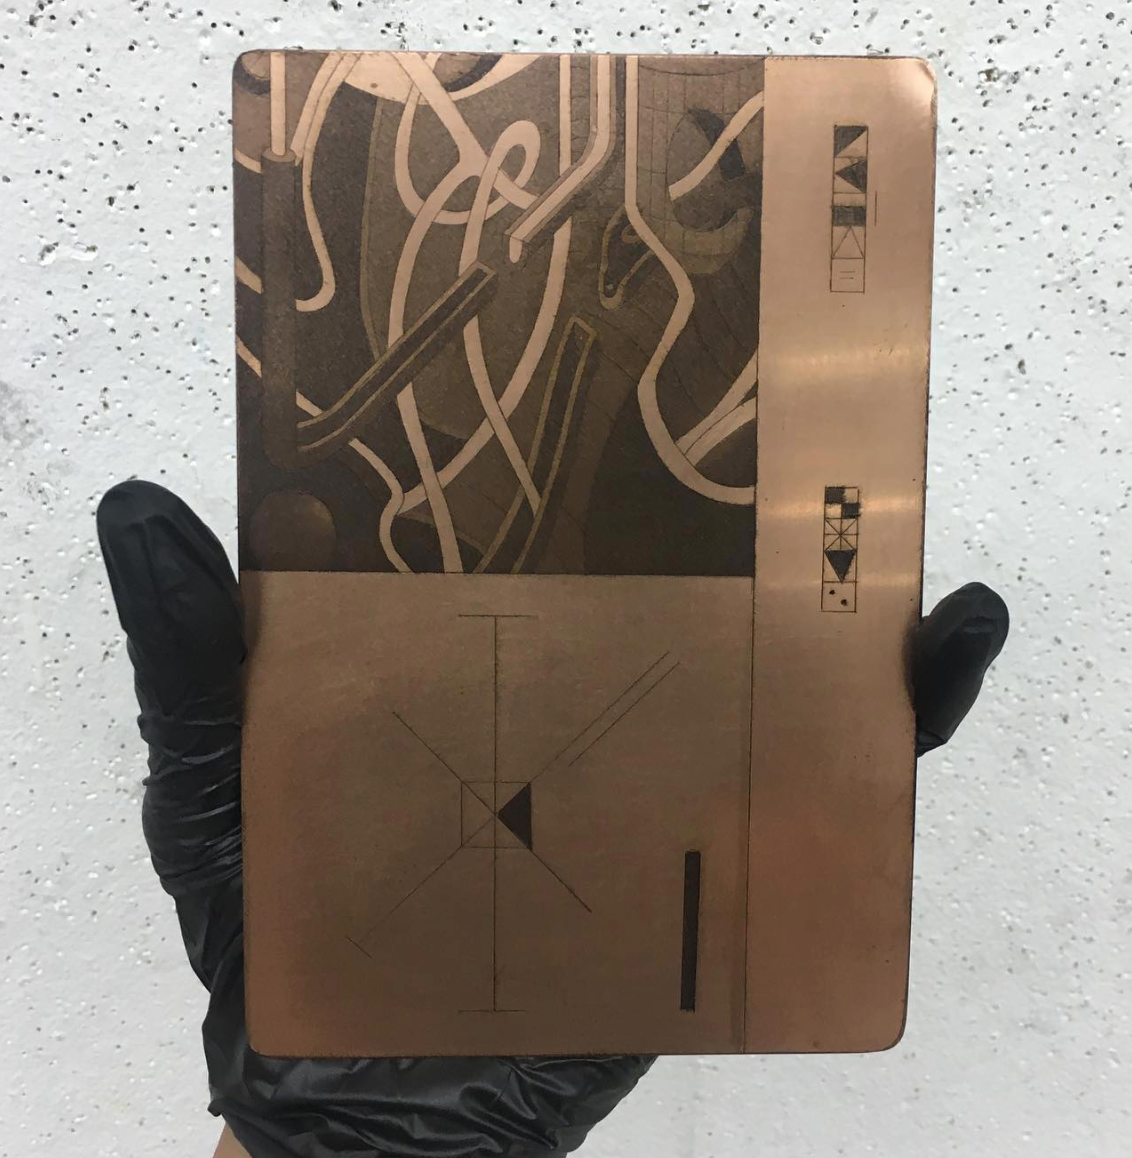 3 level repeating Copper Etching Masterclass Course with Erika Shiba